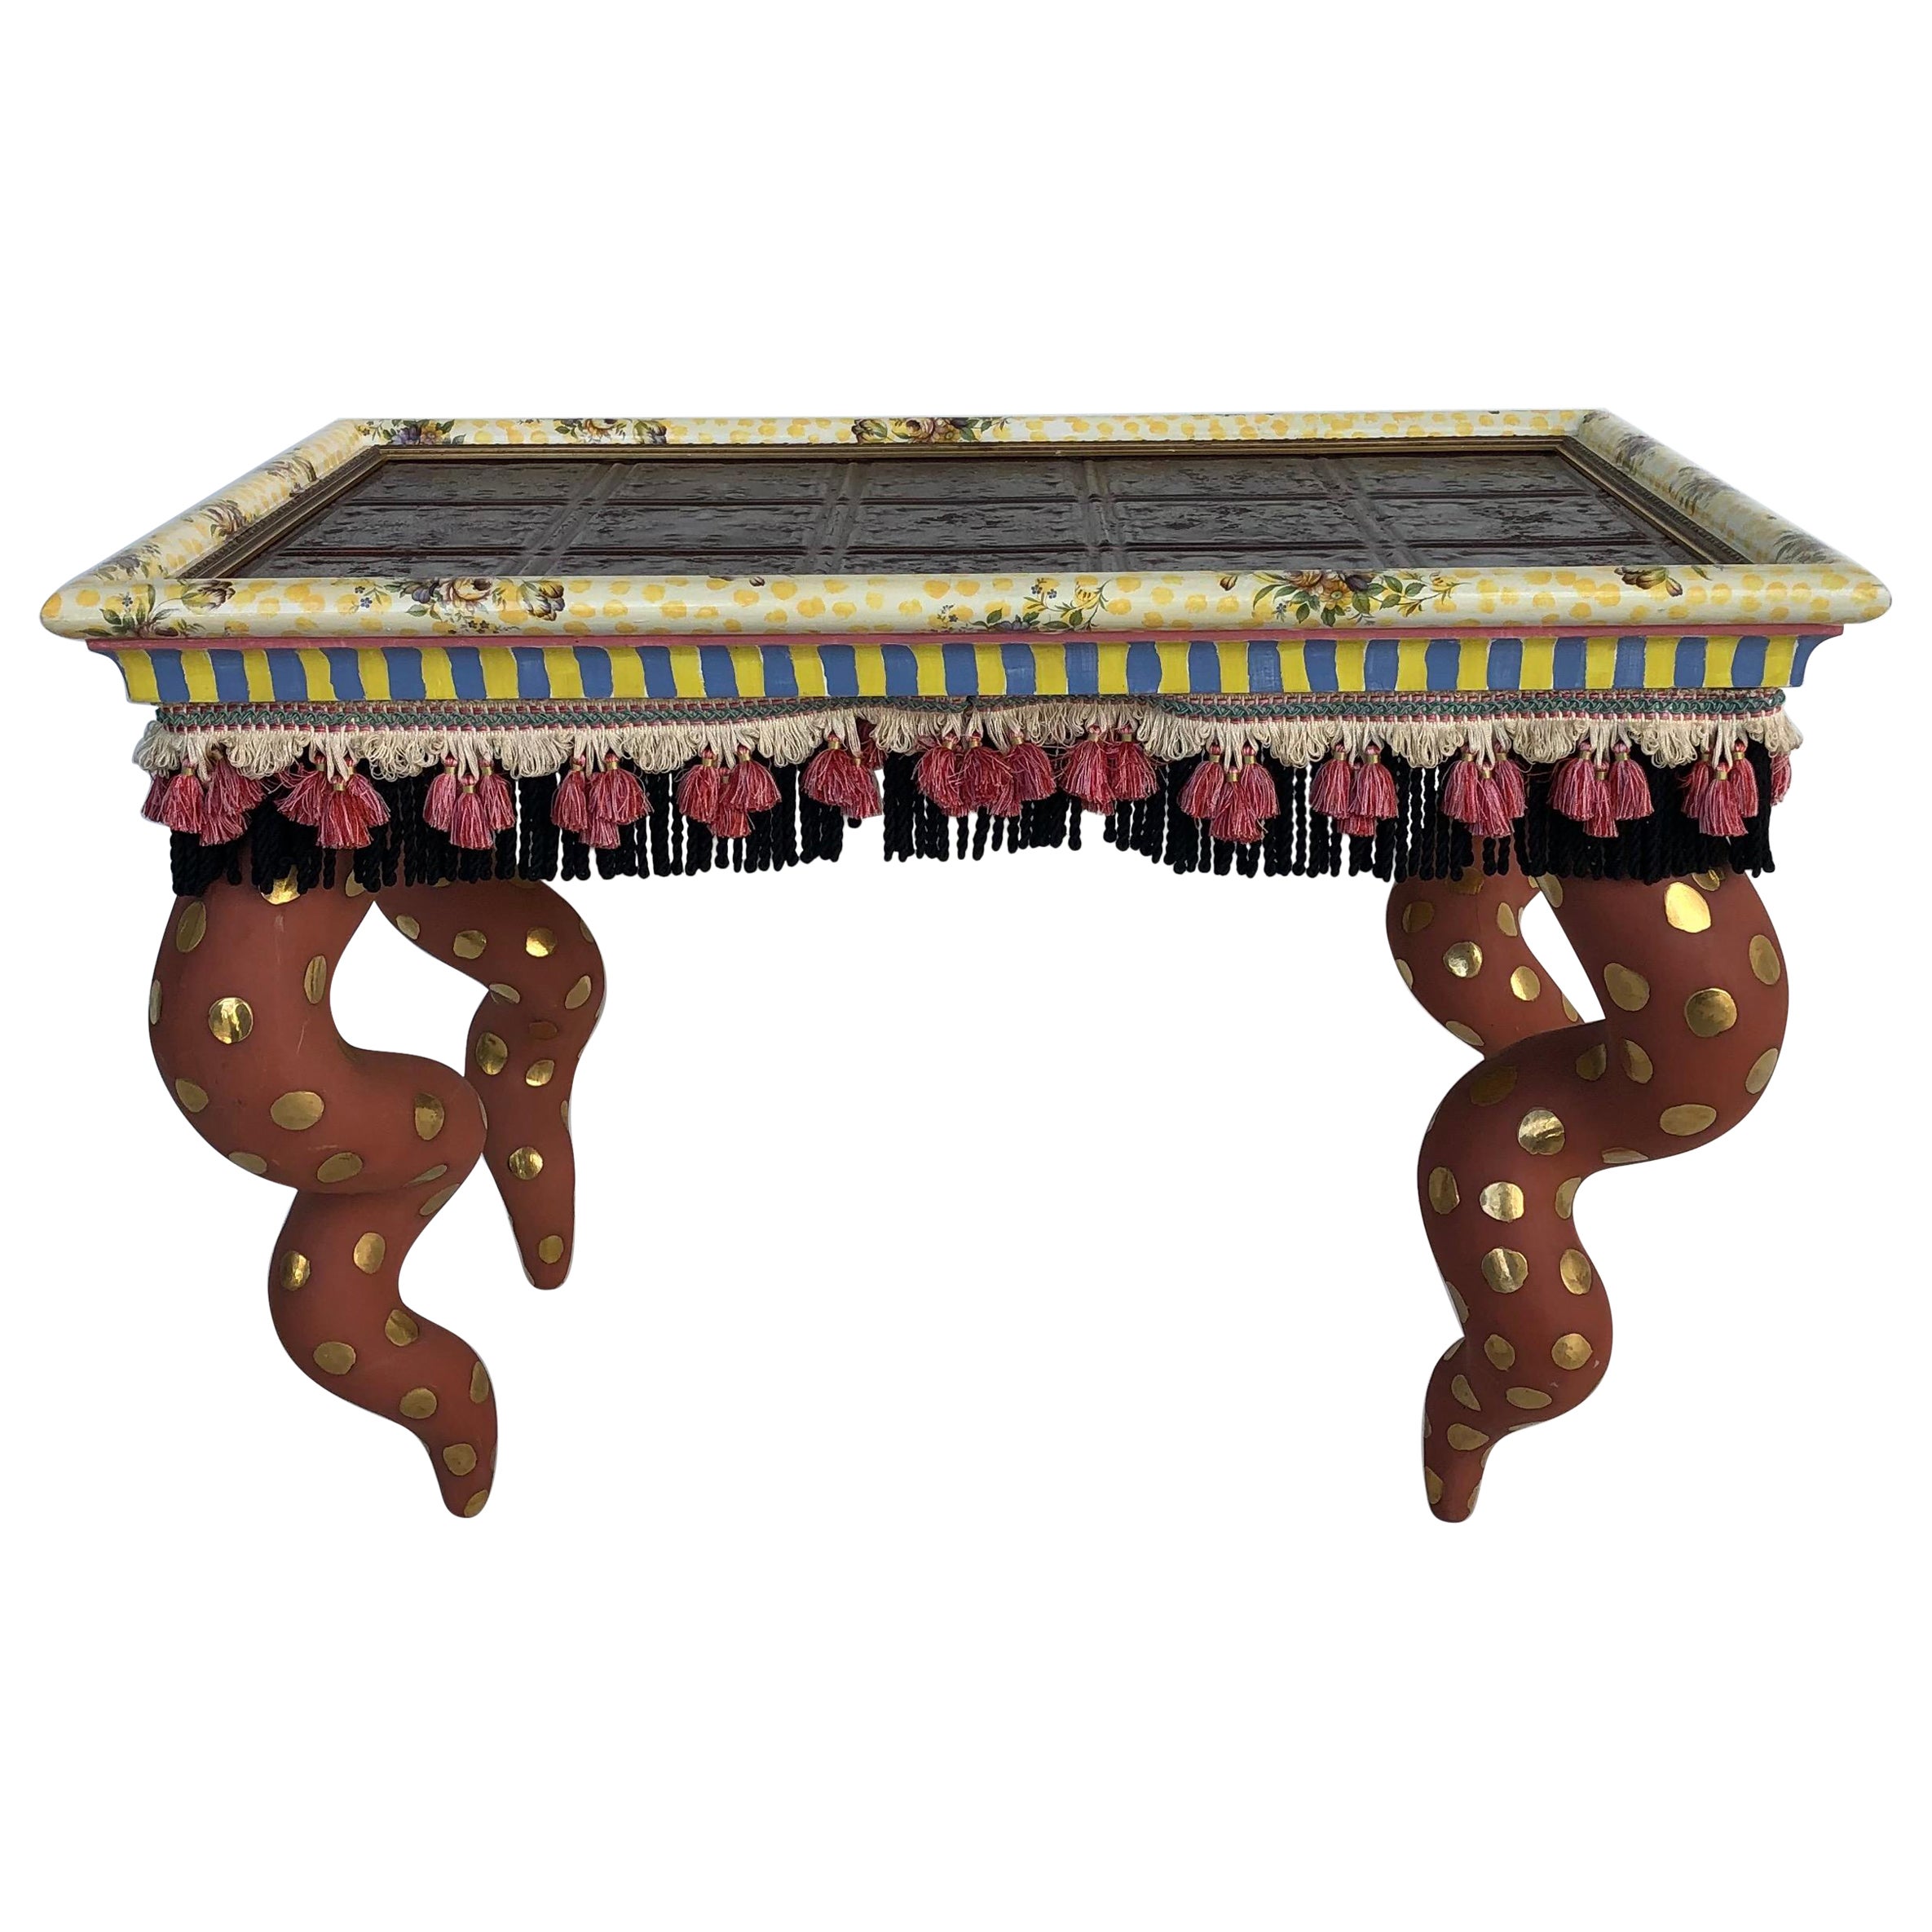 Mackenzie Childs Painted Ceramic/Wood Coffee Table with Tiles, Tassels, Signed